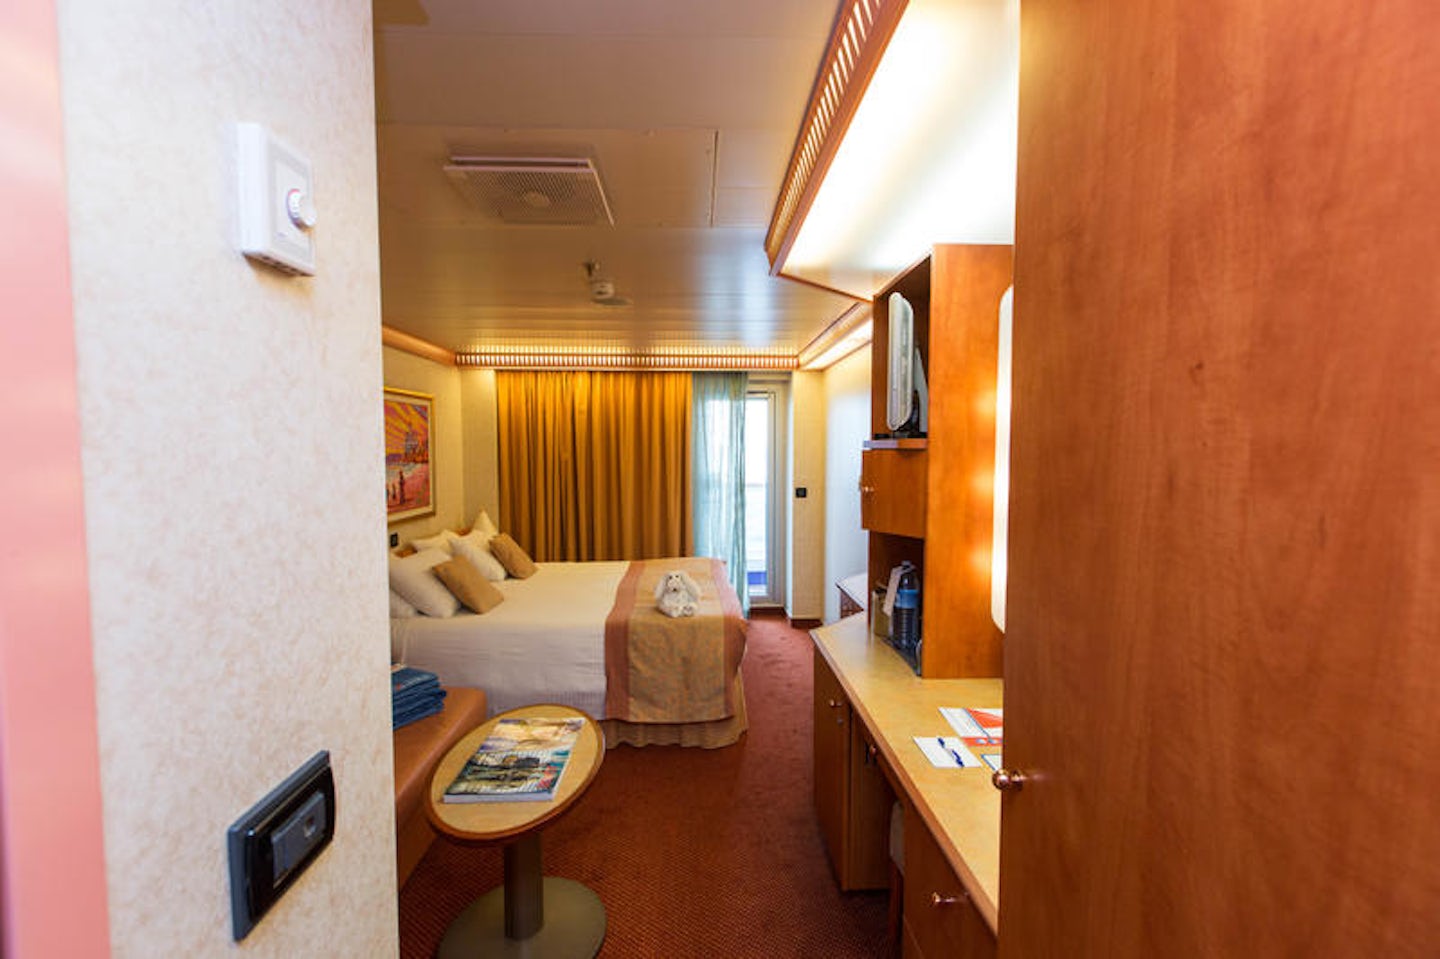 The Balcony Cabin on Carnival Freedom